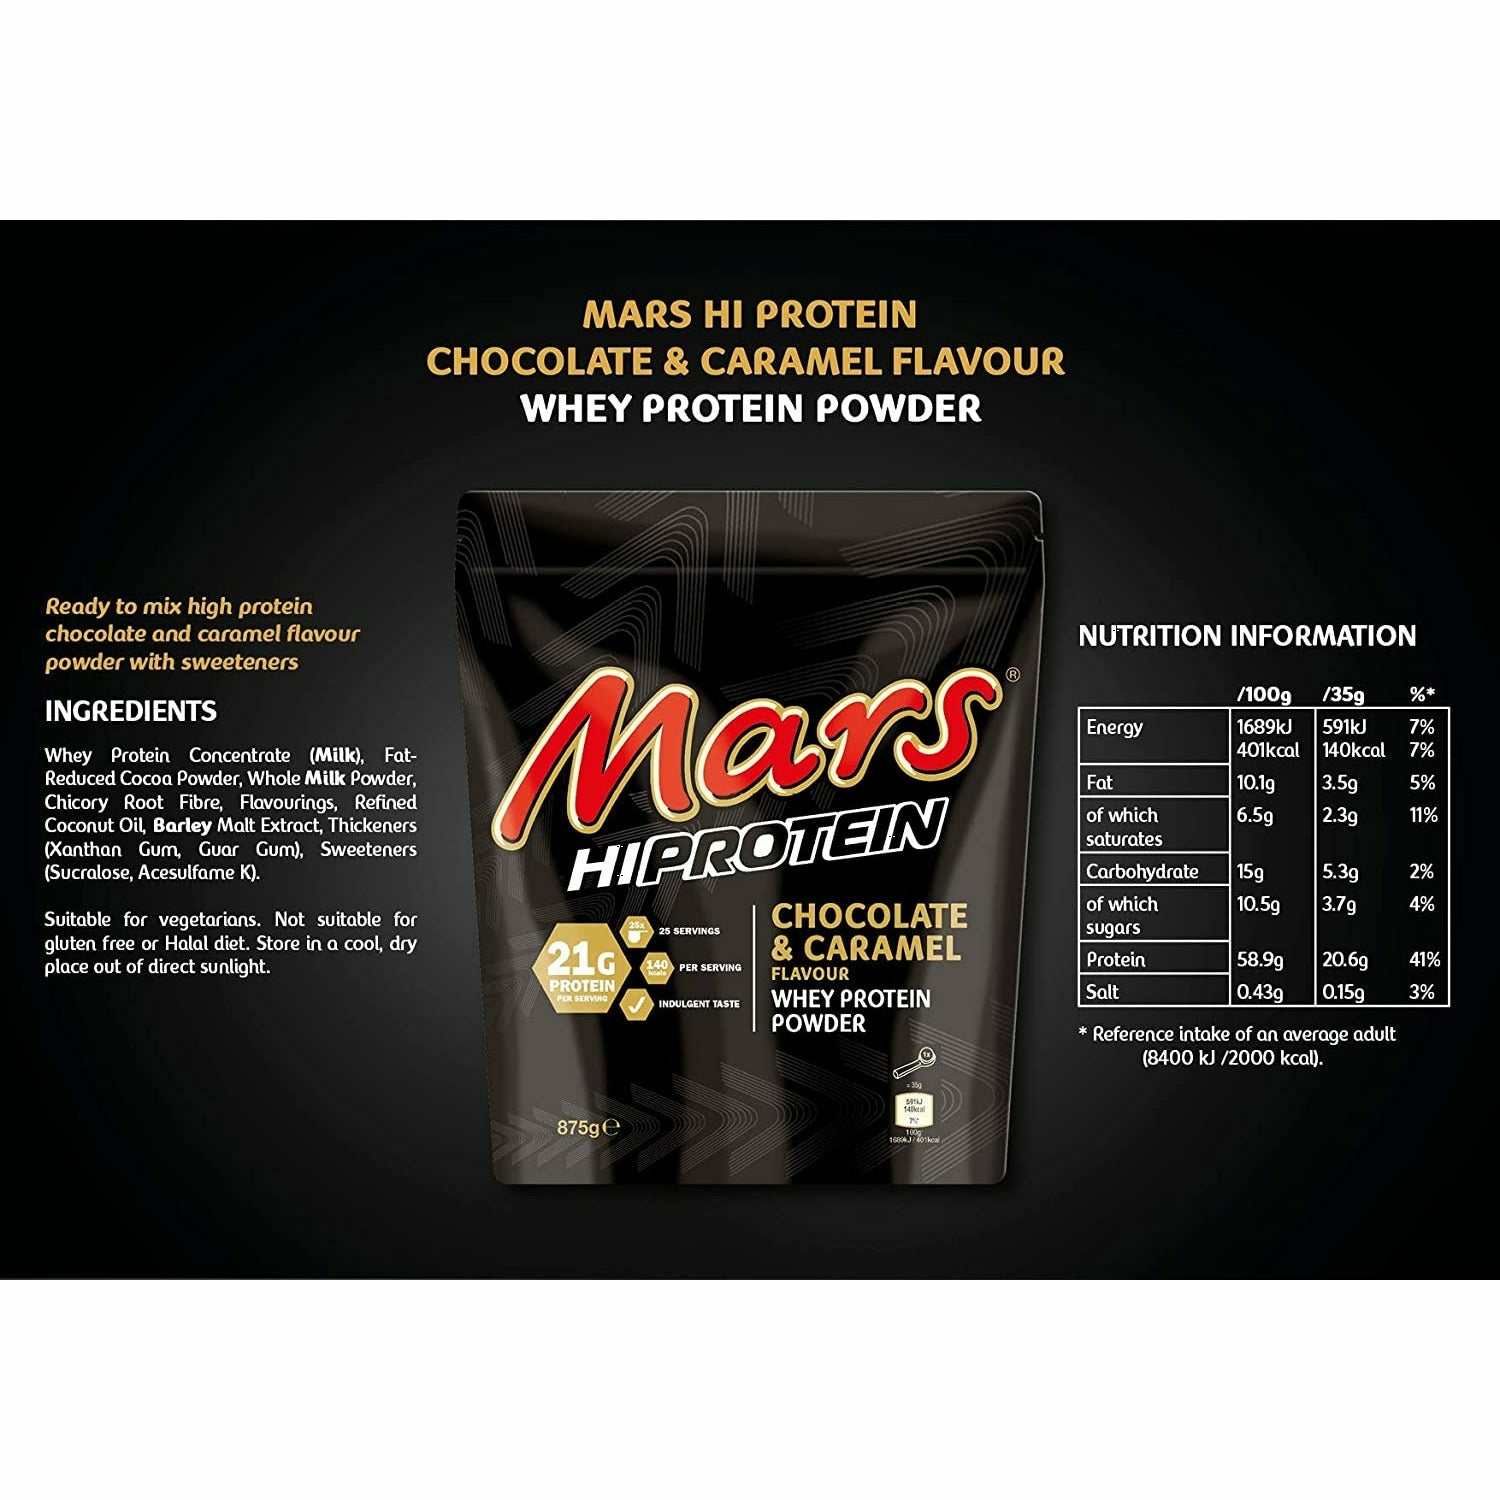 MARS Brand Hi Protein Whey Protein Powder (25 servings) Whey Protein M&M Chocolate BEST BY MARCH 04. 2023,Mars Chocolate & Caramel BEST BY DEC 23. 2022,Snickers Chocolate Caramel & Peanut,Twix Chocolate Biscuit & Caramel,Bounty BEST BY OCT 14. 2022,Maltesers BEST BY JULY 22, 2022,Snickers WHITE Chocolate Caramel & Peanut BEST BY SEPT 28, 2022 HiProtein